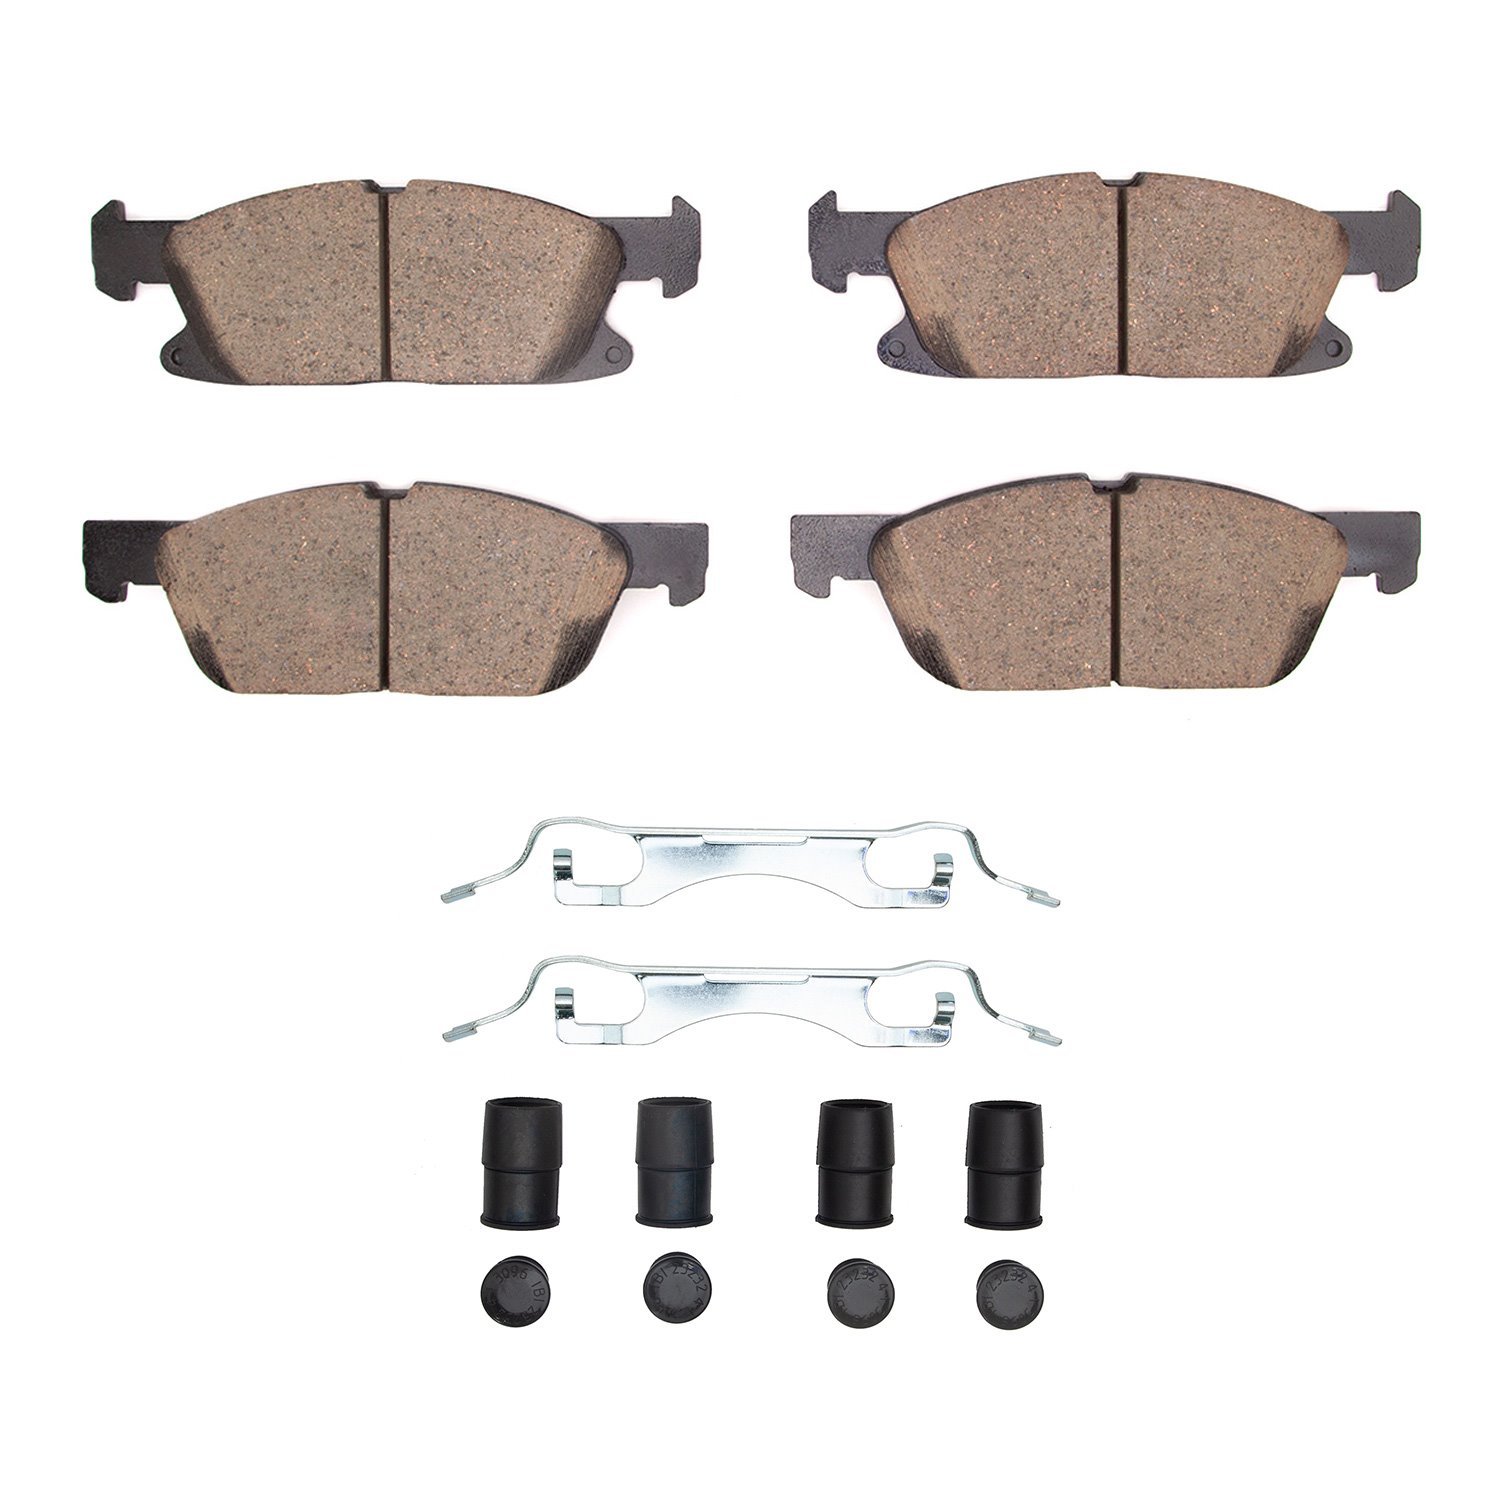 1552-2180-01 5000 Advanced Low-Metallic Brake Pads & Hardware Kit, Fits Select Ford/Lincoln/Mercury/Mazda, Position: Front